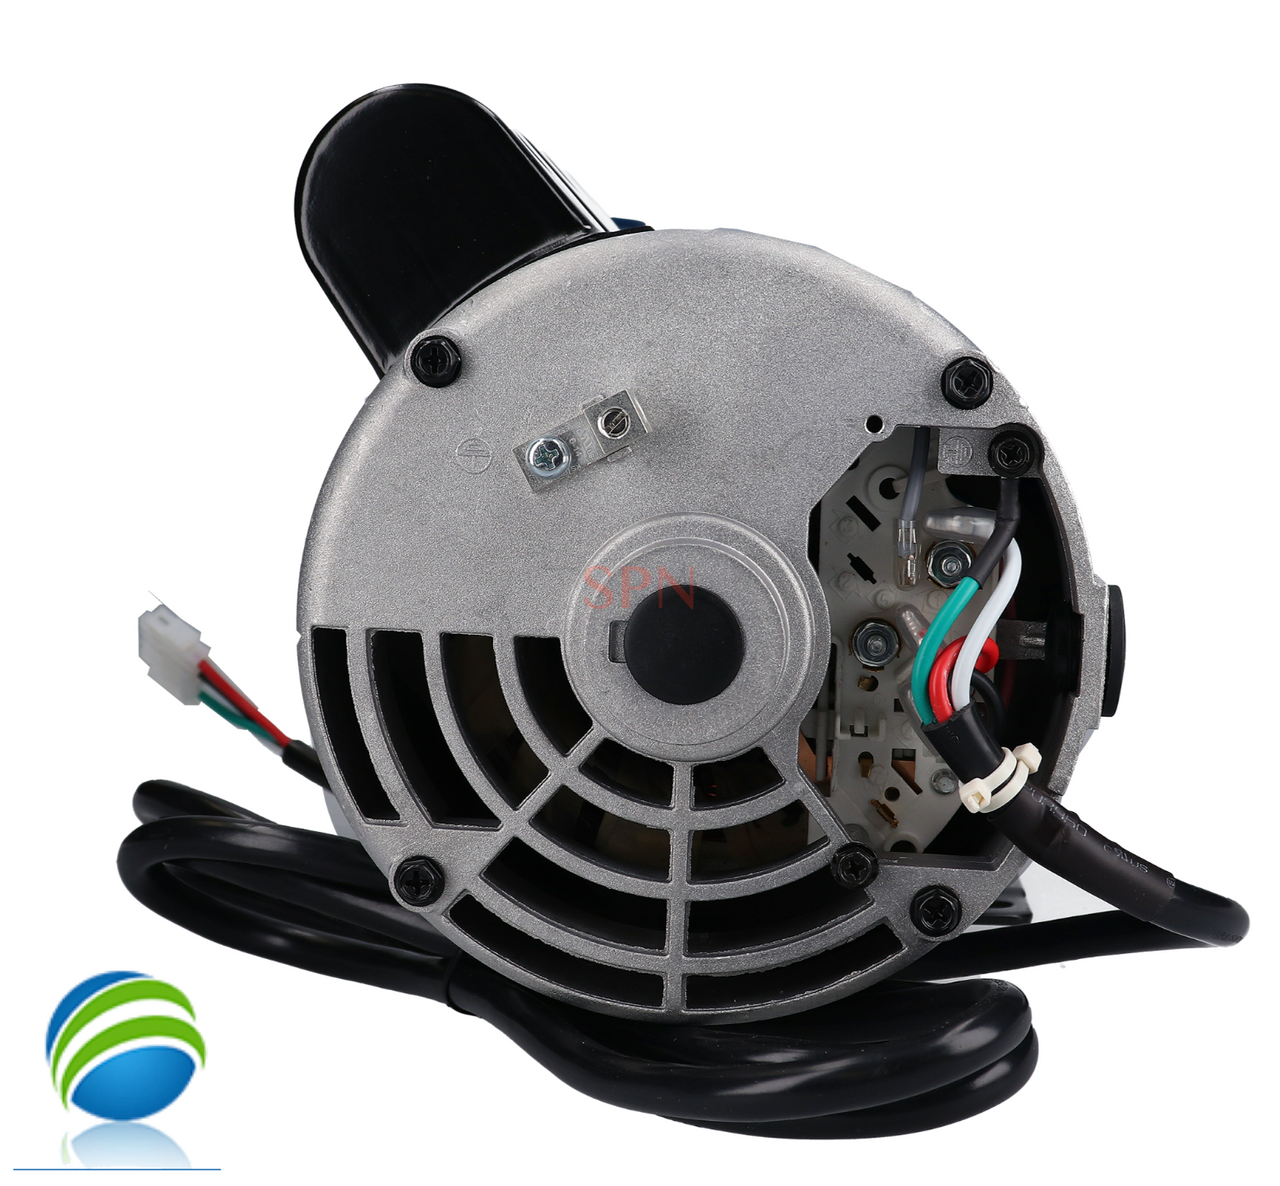 This is a properly wired pump with Red as High Speed Black as Low Speed and White as Hot Neutral for this Pump, Aqua-Flo, Maelstrom, 3.0, HP, 230v, 2-spd, 56fr, 2"X 2" Note: There are some rare occasions where Black is High Speed and Red is Low so look at your old pump before removing the wire to be sure. If you didn't make sure when you power up the first time listen for the pump to come on in low speed first if it is high first you have the wires backward which will cause your hot tub to overheat.